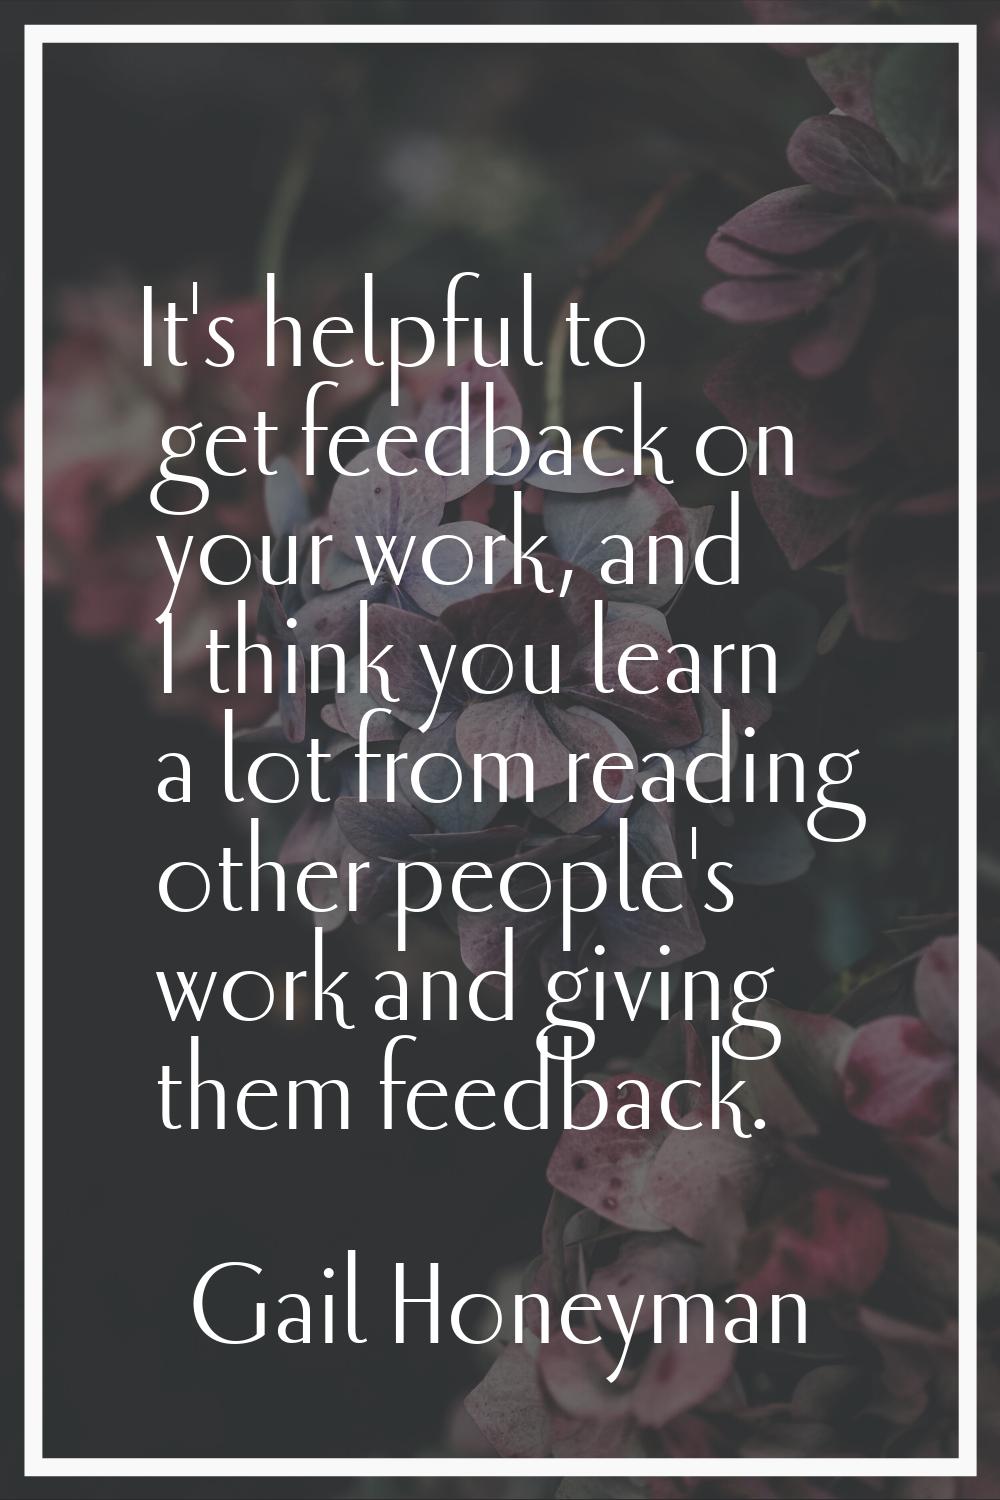 It's helpful to get feedback on your work, and I think you learn a lot from reading other people's 